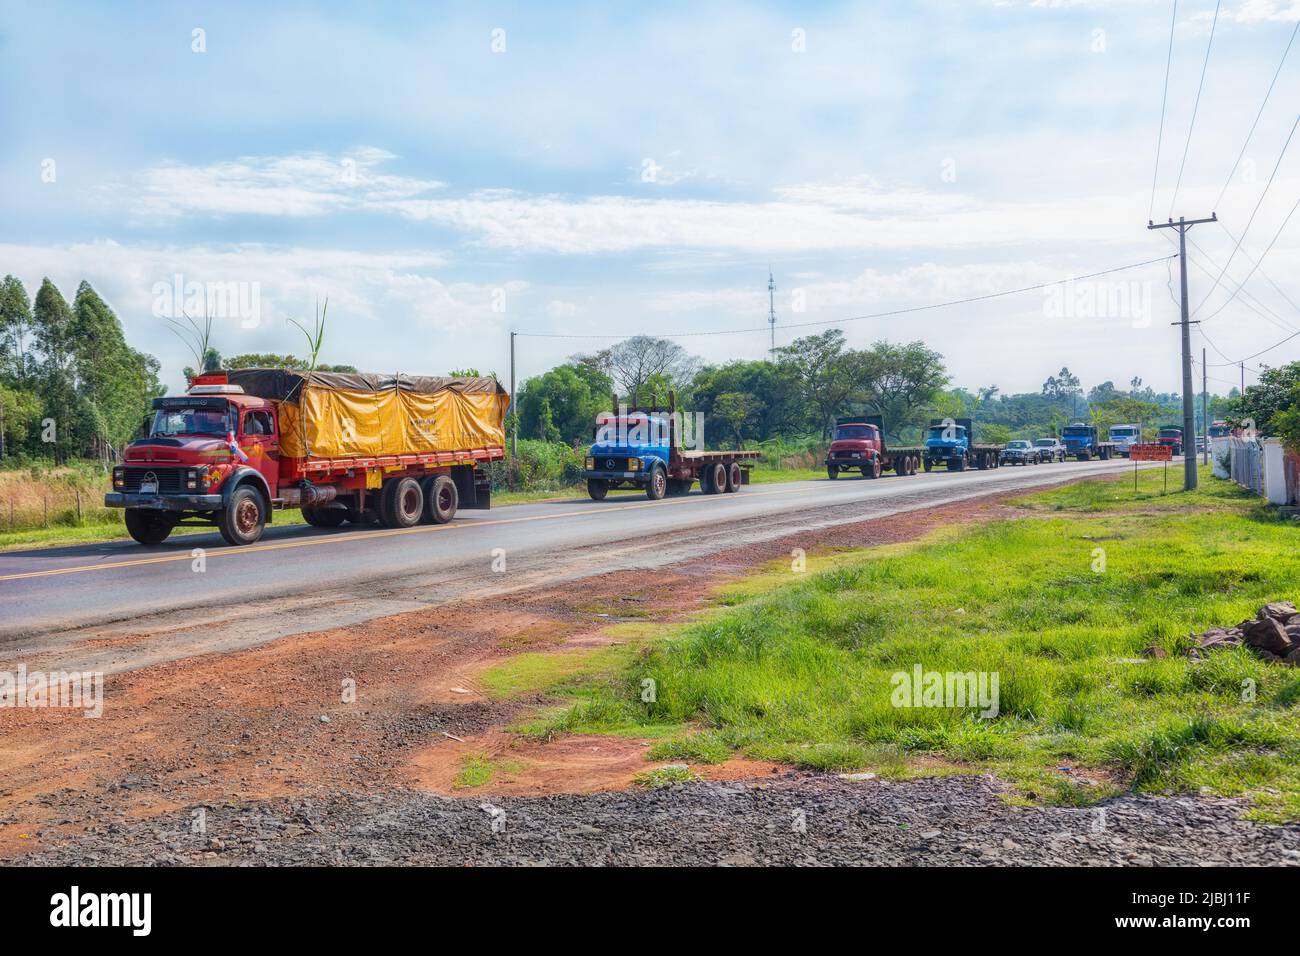 Jorge Naville, Mbocayaty del Guaira, Paraguay - February 21, 2022: A convoy of old Mercedes trucks on their way to a demonstration against high diesel Stock Photo